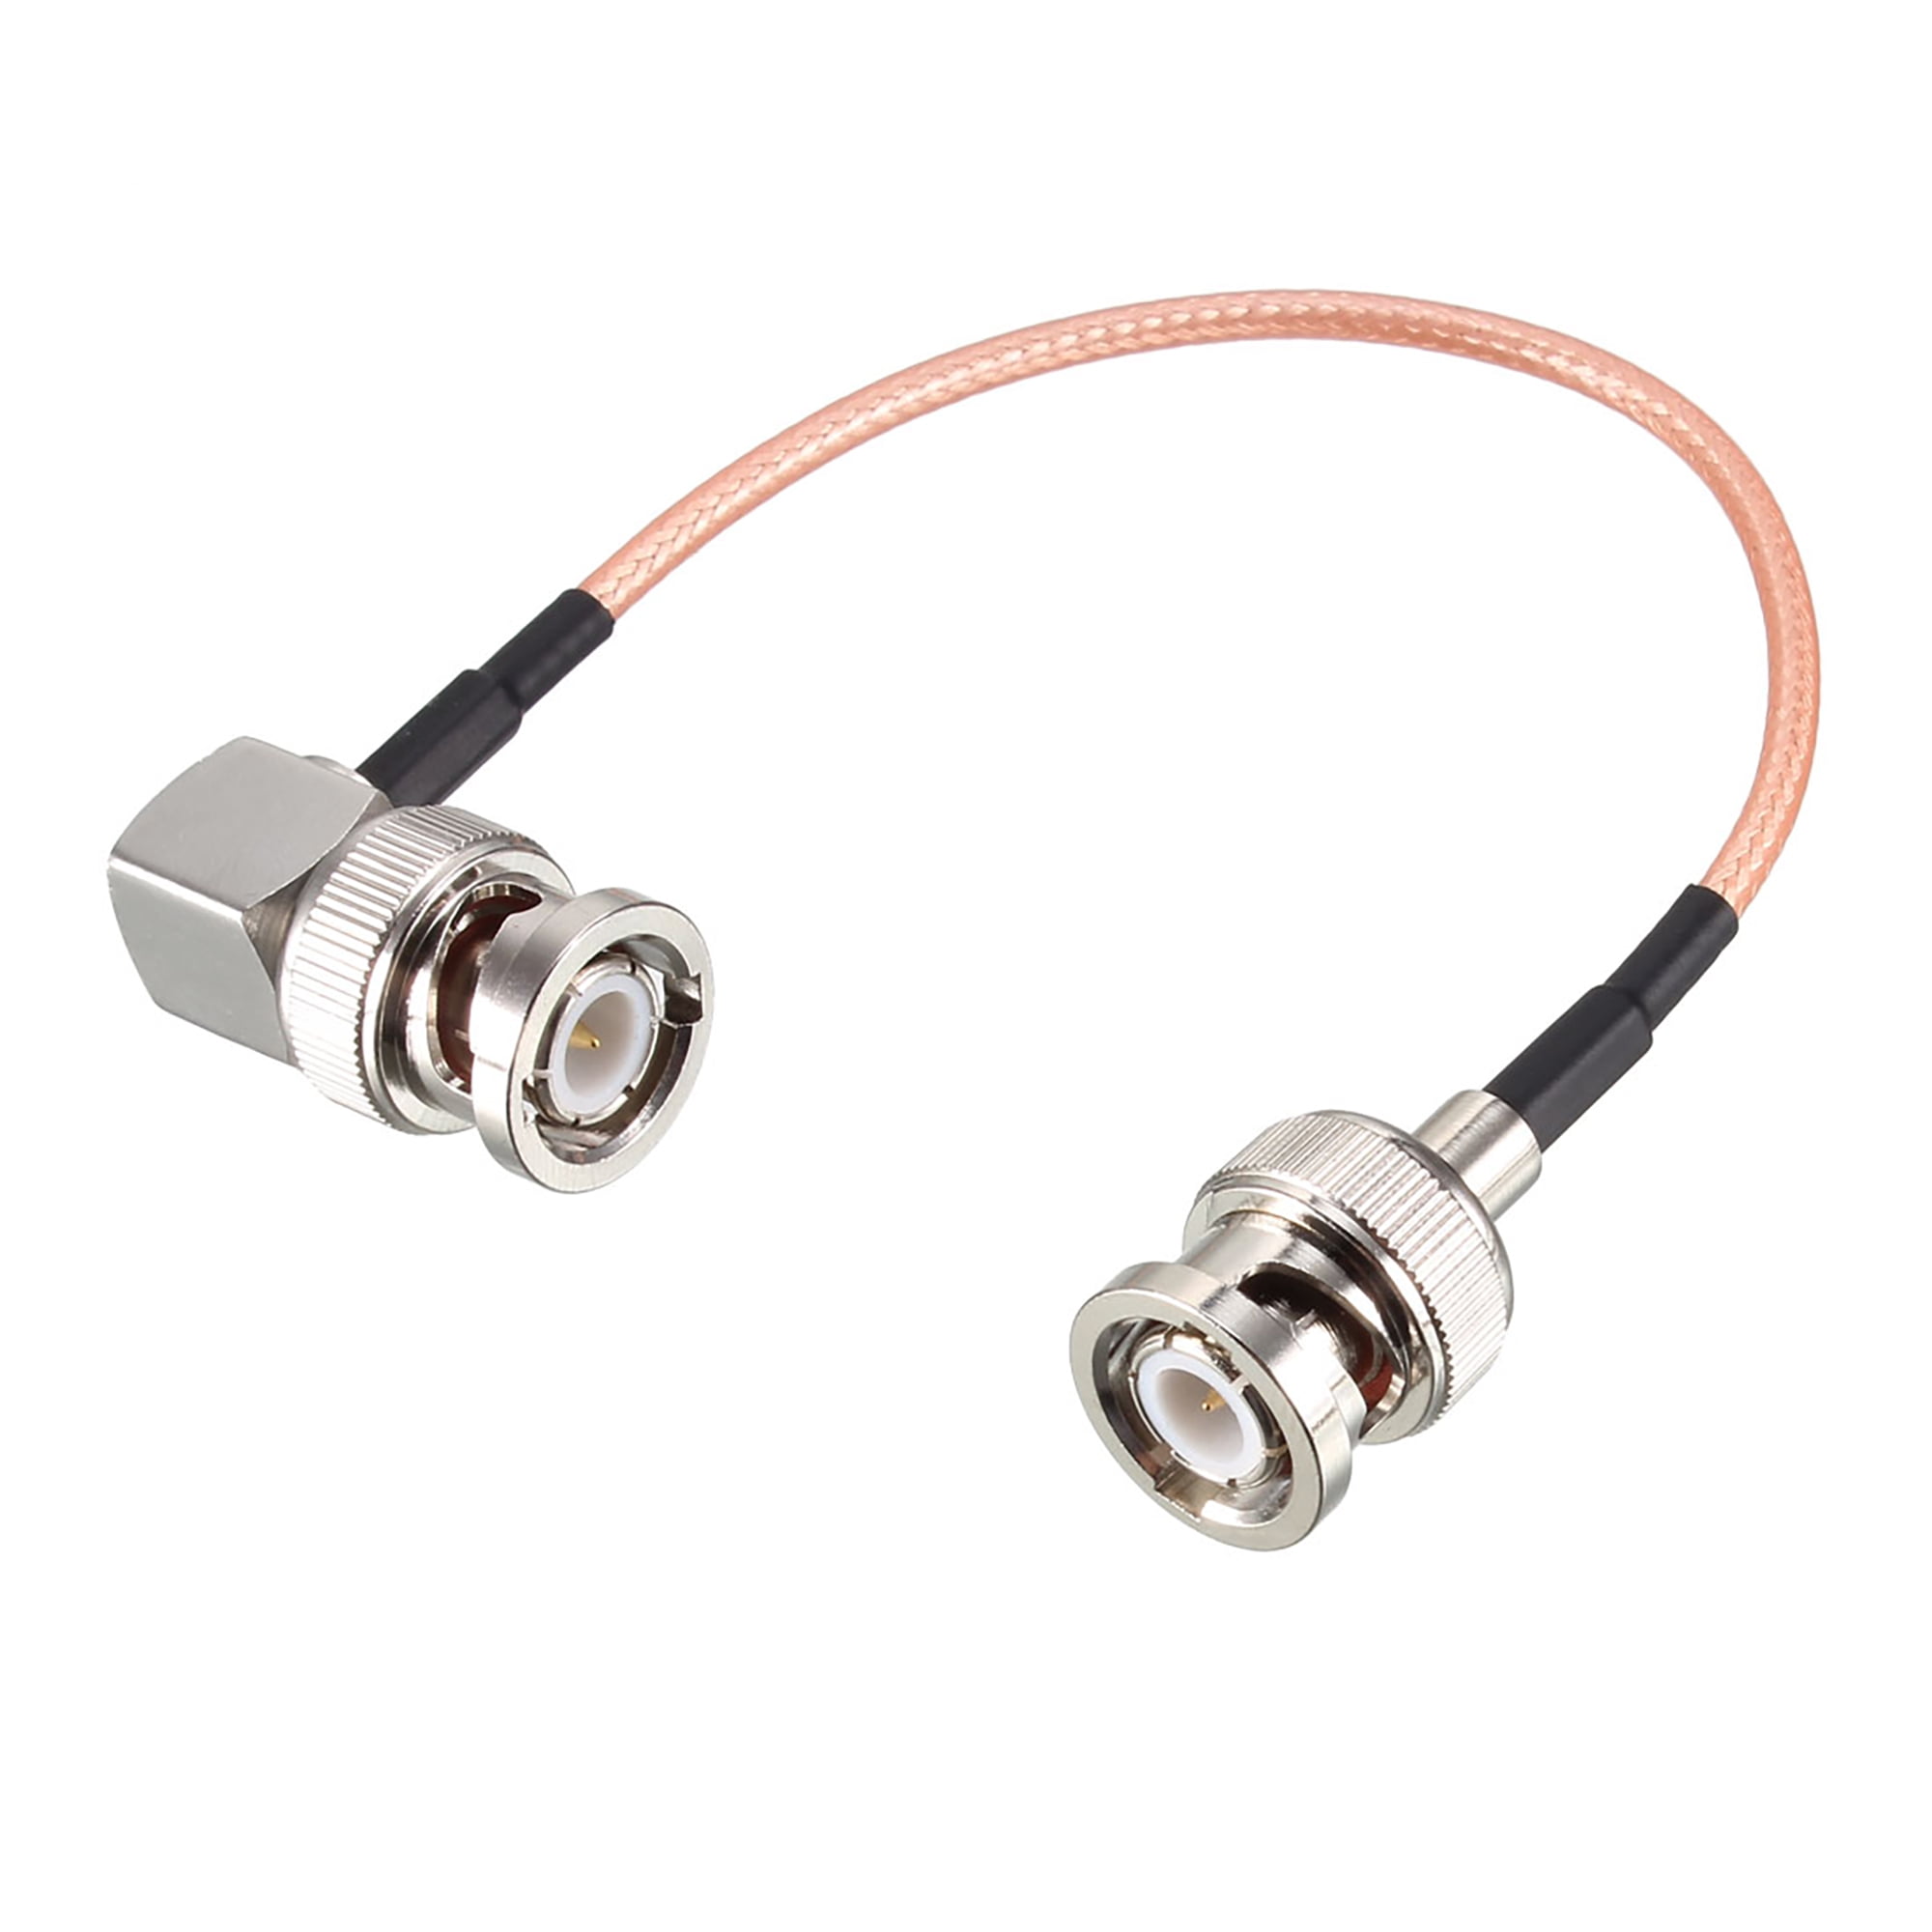 3 feet RG400 Low Loss BNC MALE to BNC FEMALE Pigtail Jumper RF coaxial cable 50ohm High Quality Quick USA Shipping 